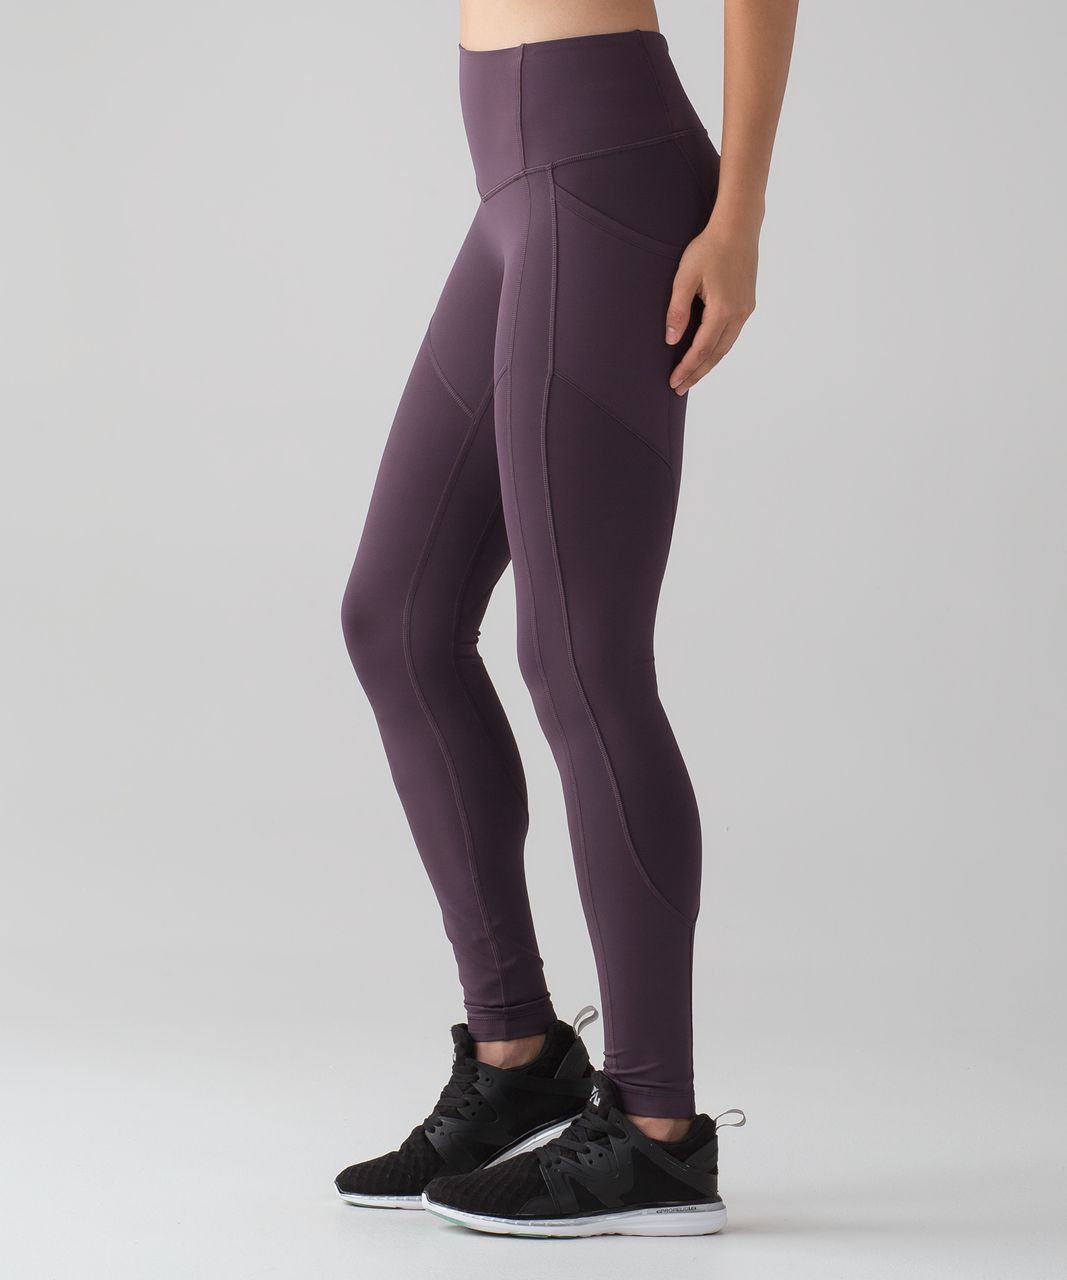 Lululemon All the Right Places High-Rise Pant 28 reviews in